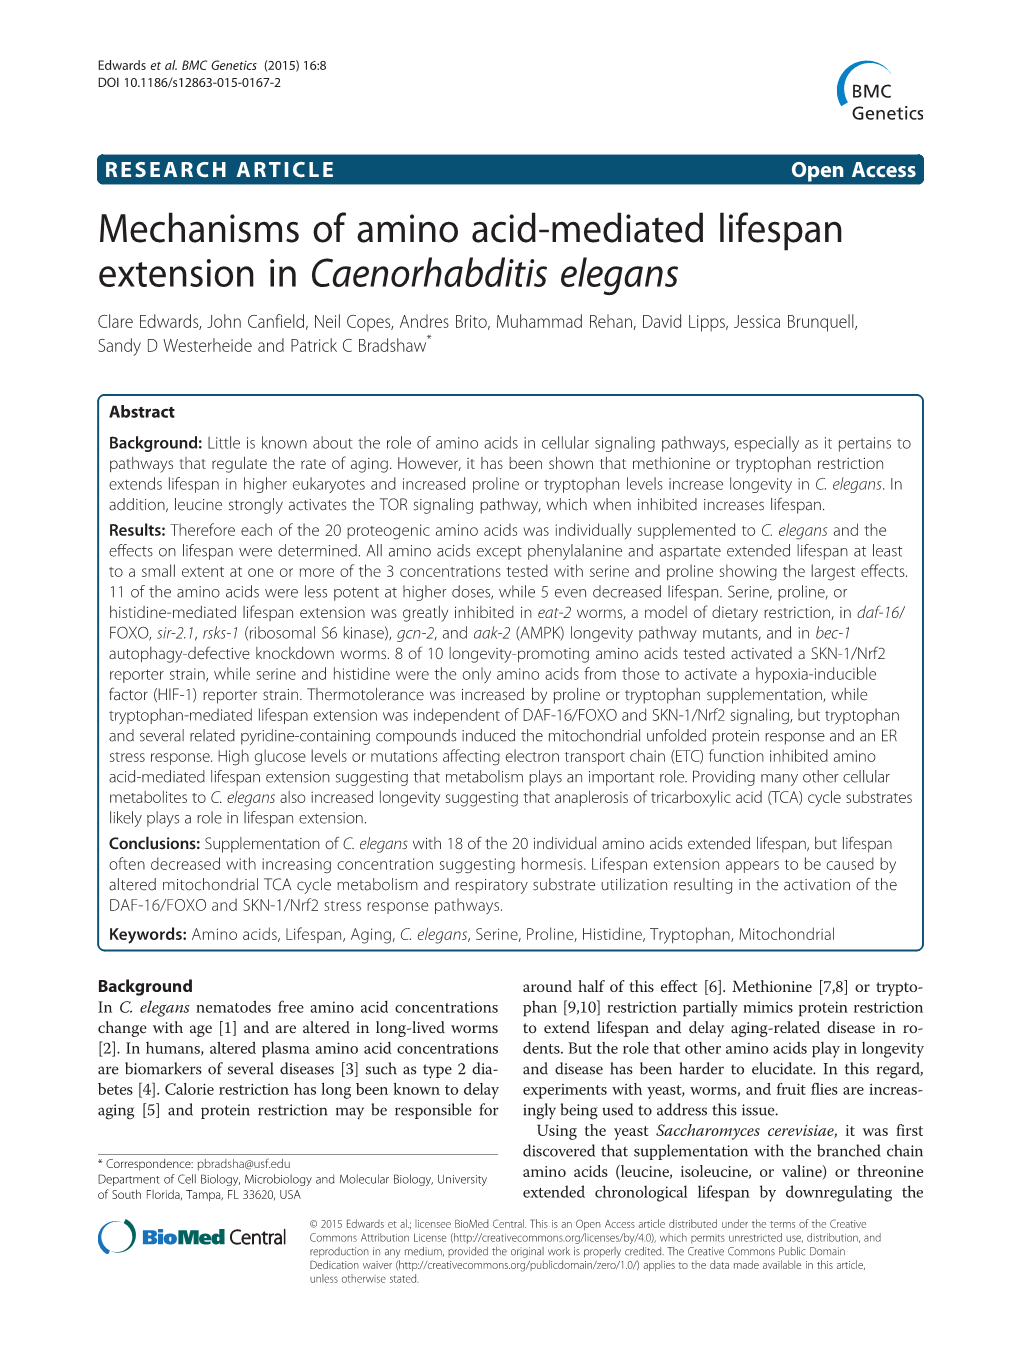 Mechanisms of Amino Acid-Mediated Lifespan Extension In